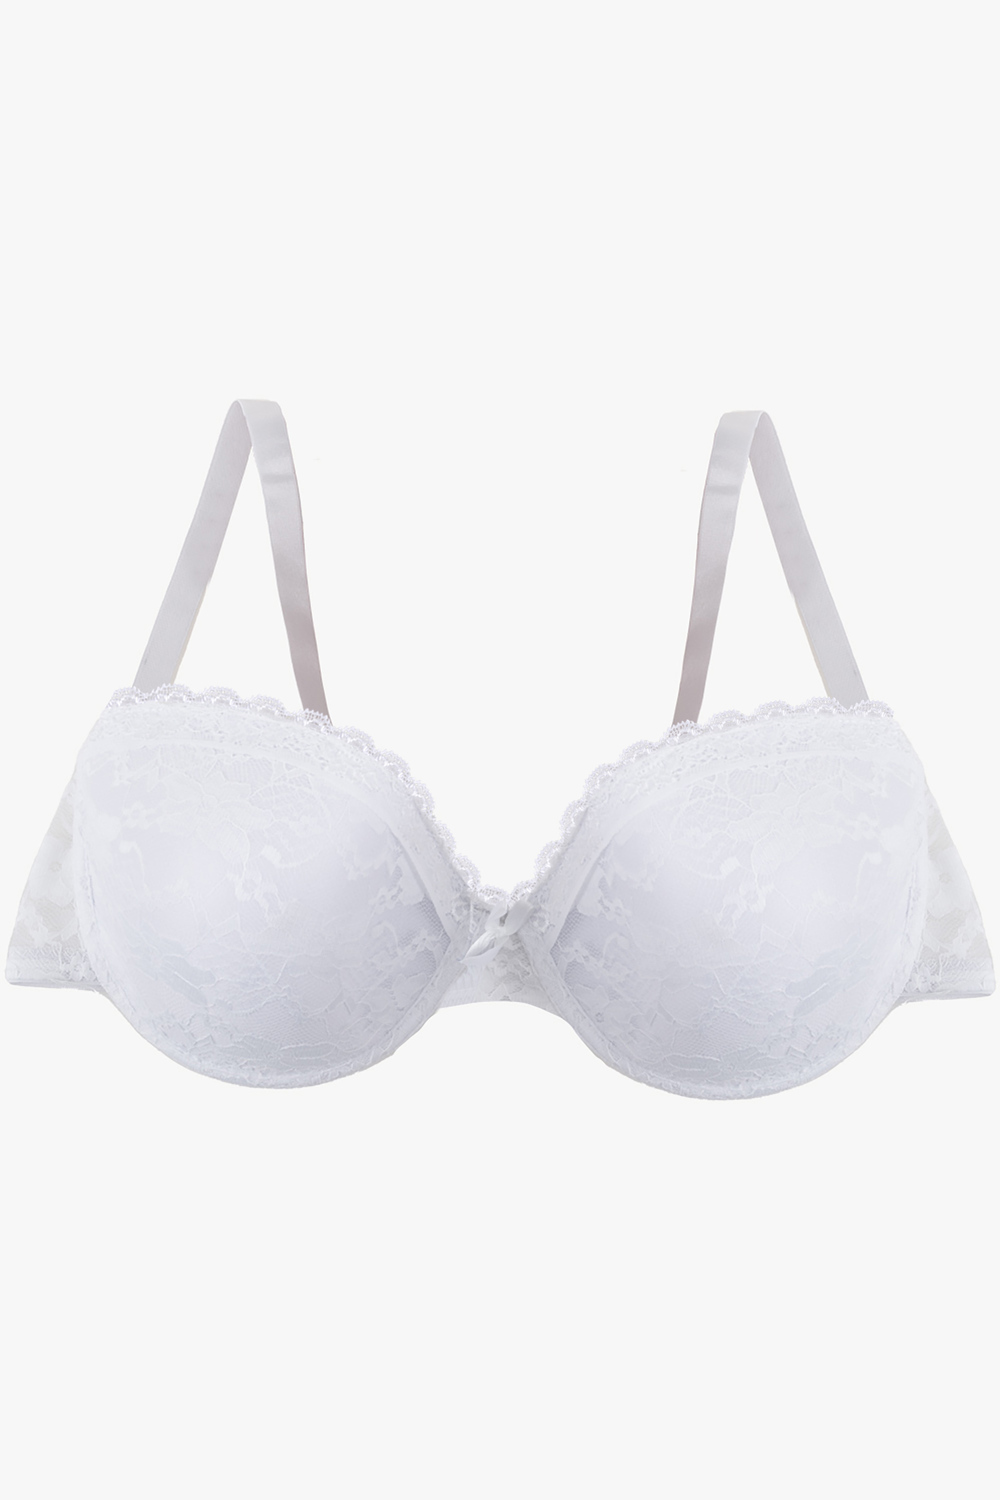 Full coverage lace underwire bra set with cheeky panty, white - Plus Size.  Colour: white. Size: 38d/8